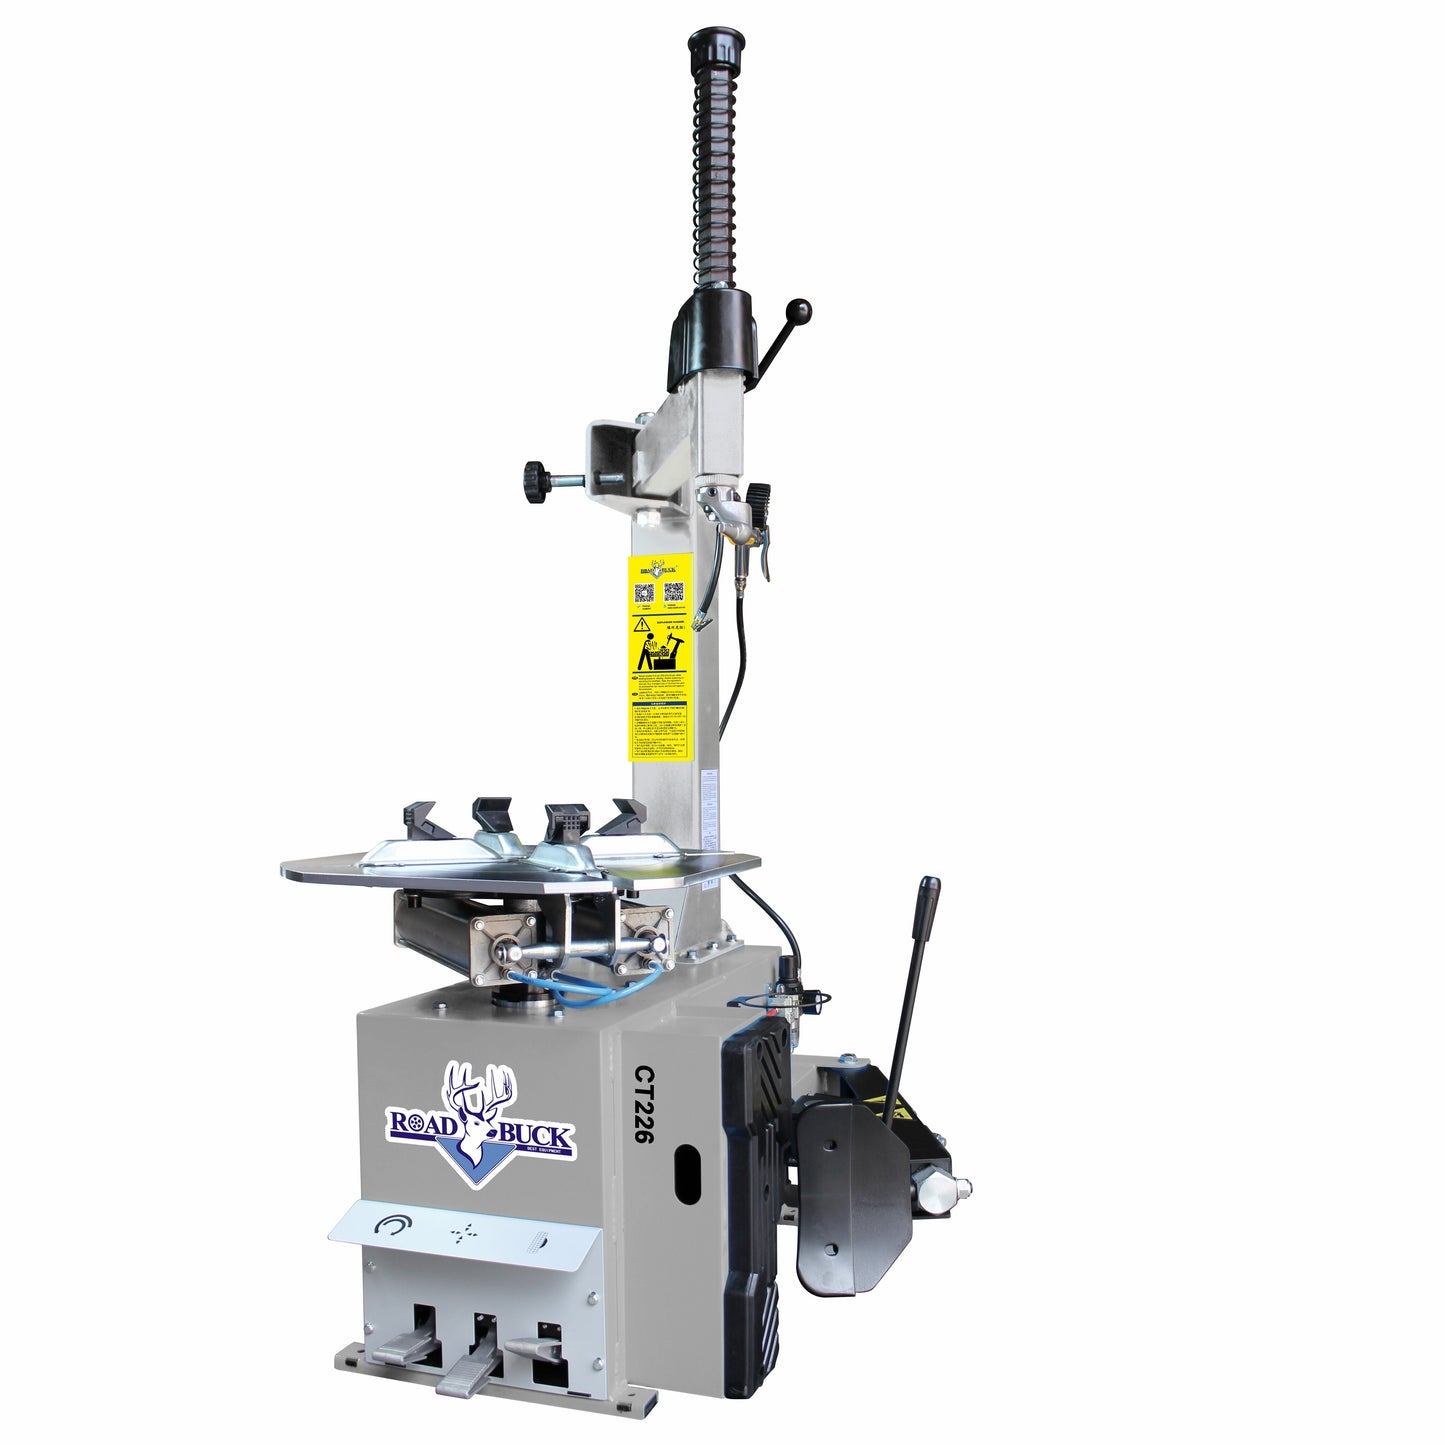 New 3d wheel alignment Tire changer machine and wheel balancer combo